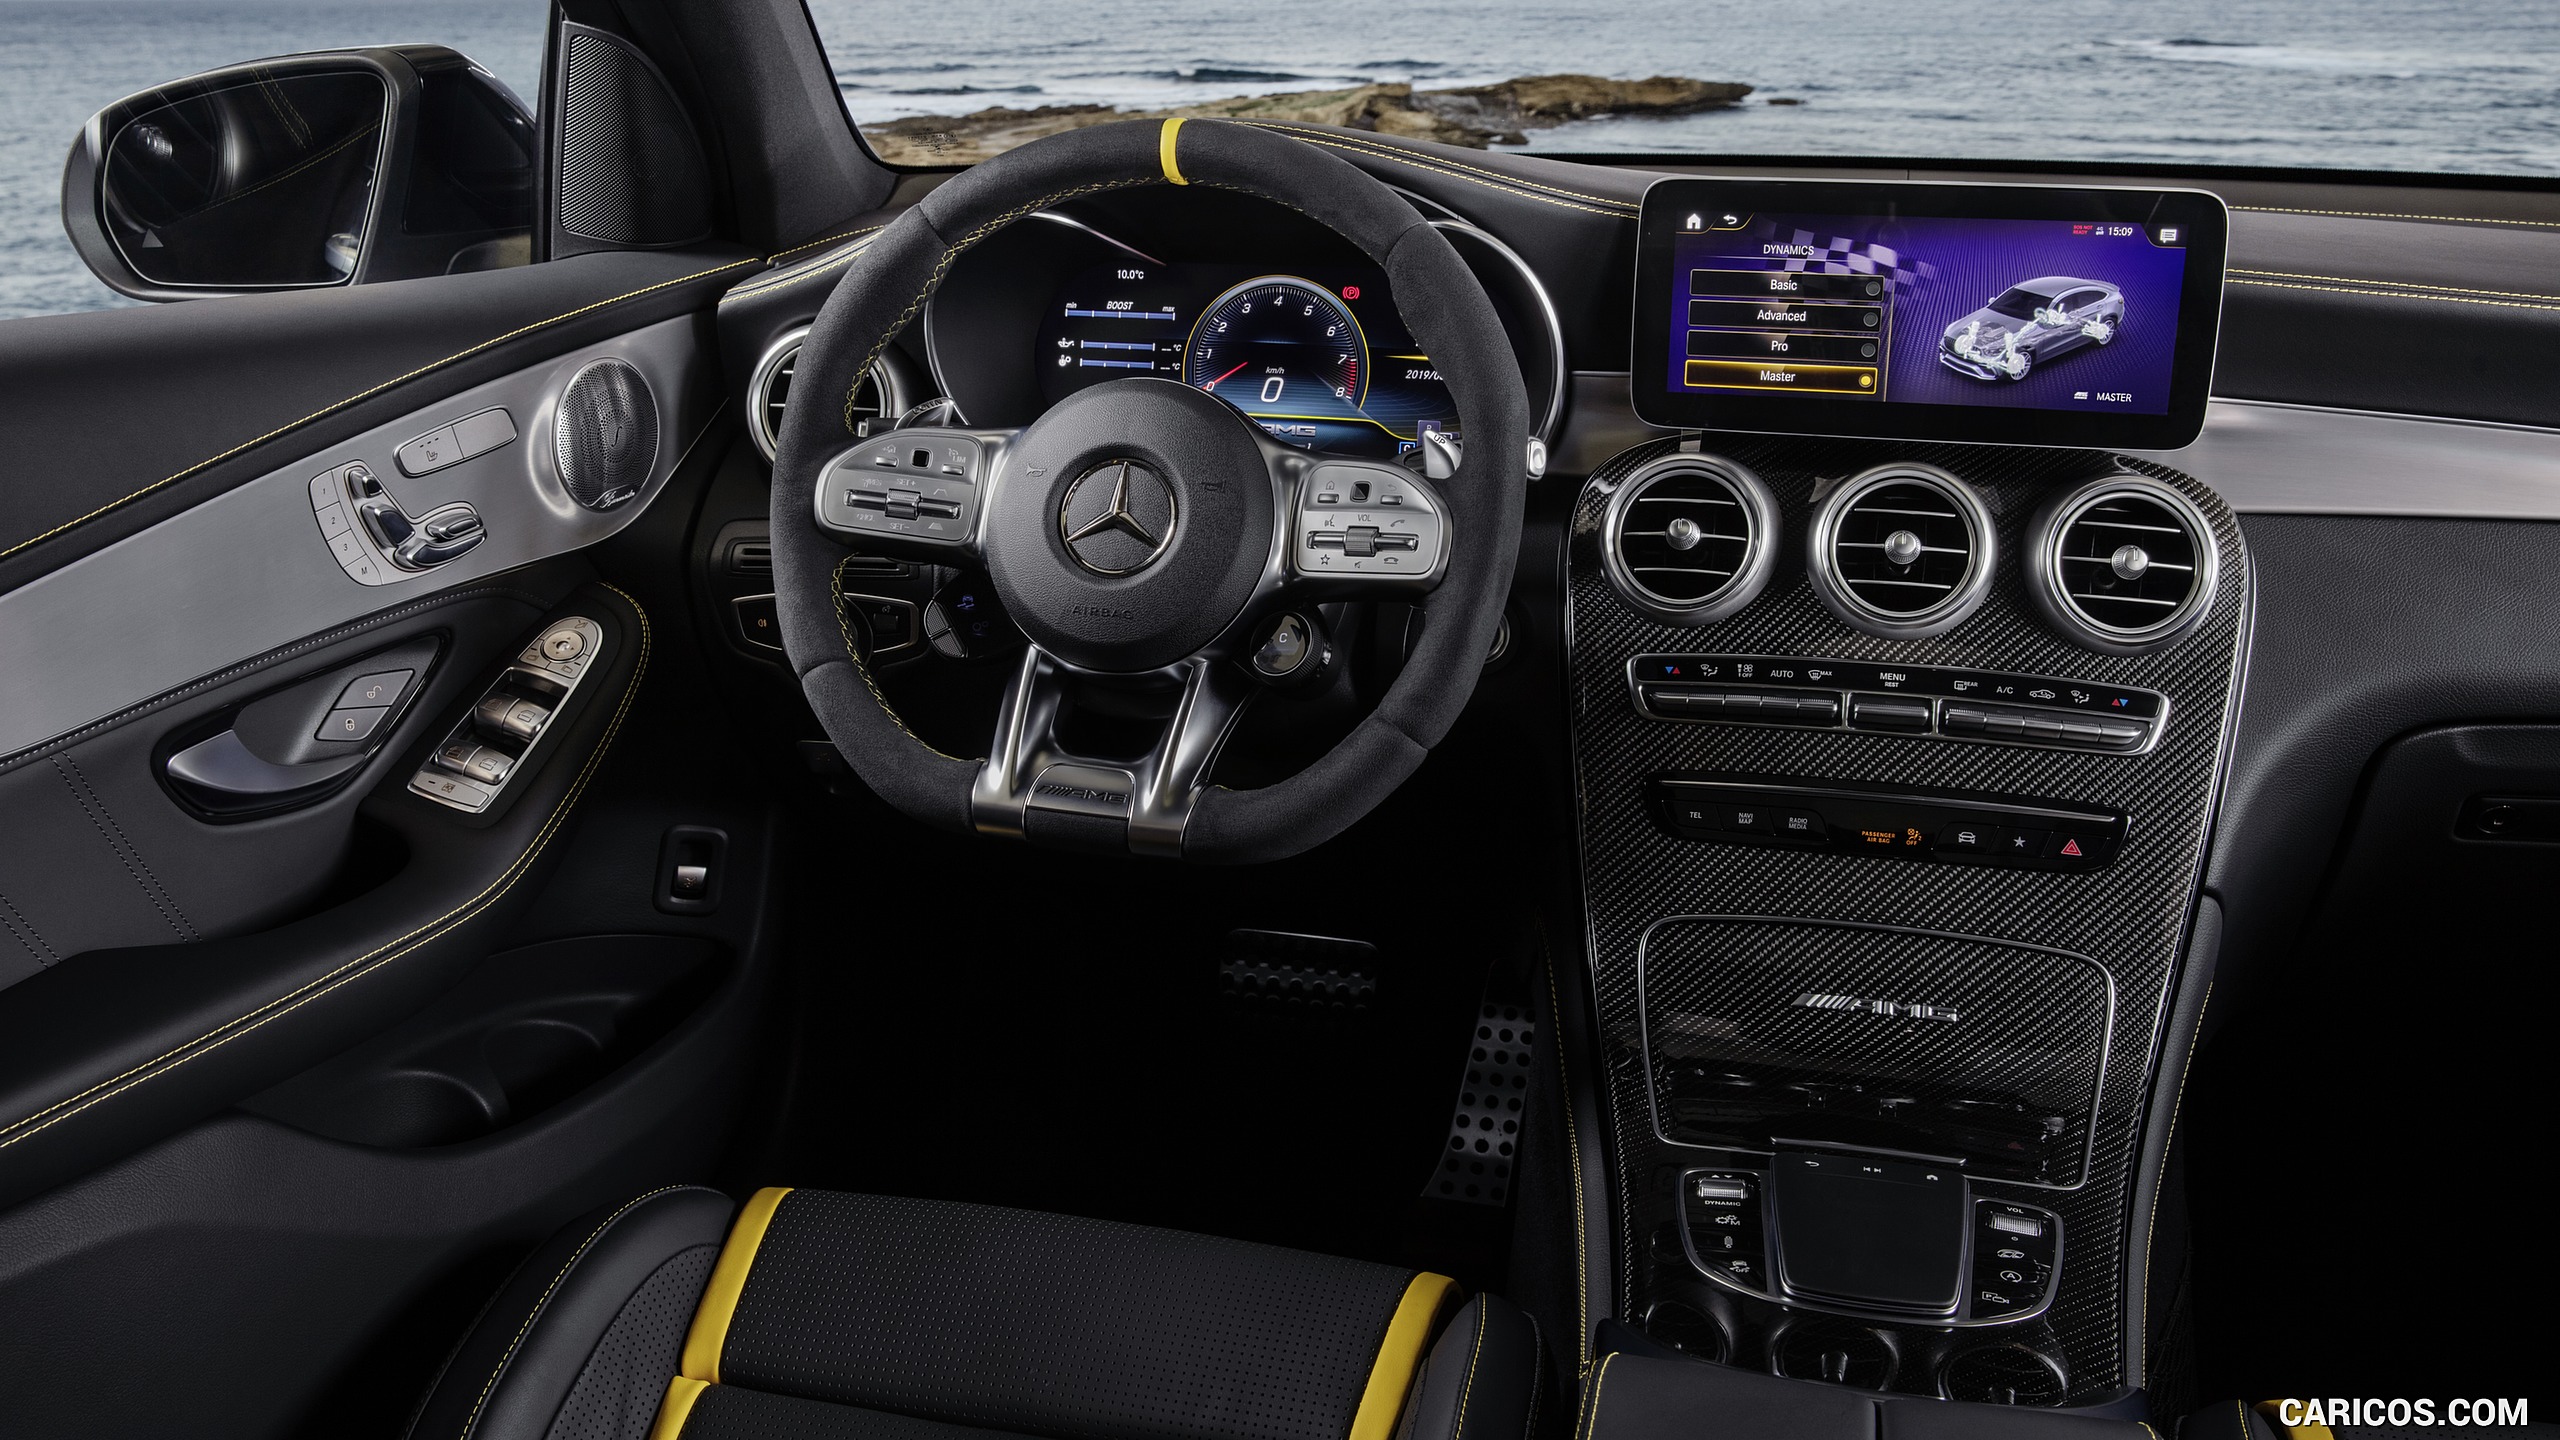 2020 Mercedes-AMG GLC 63 S 4MATIC+ Coupe - Interior, Cockpit, #20 of 102